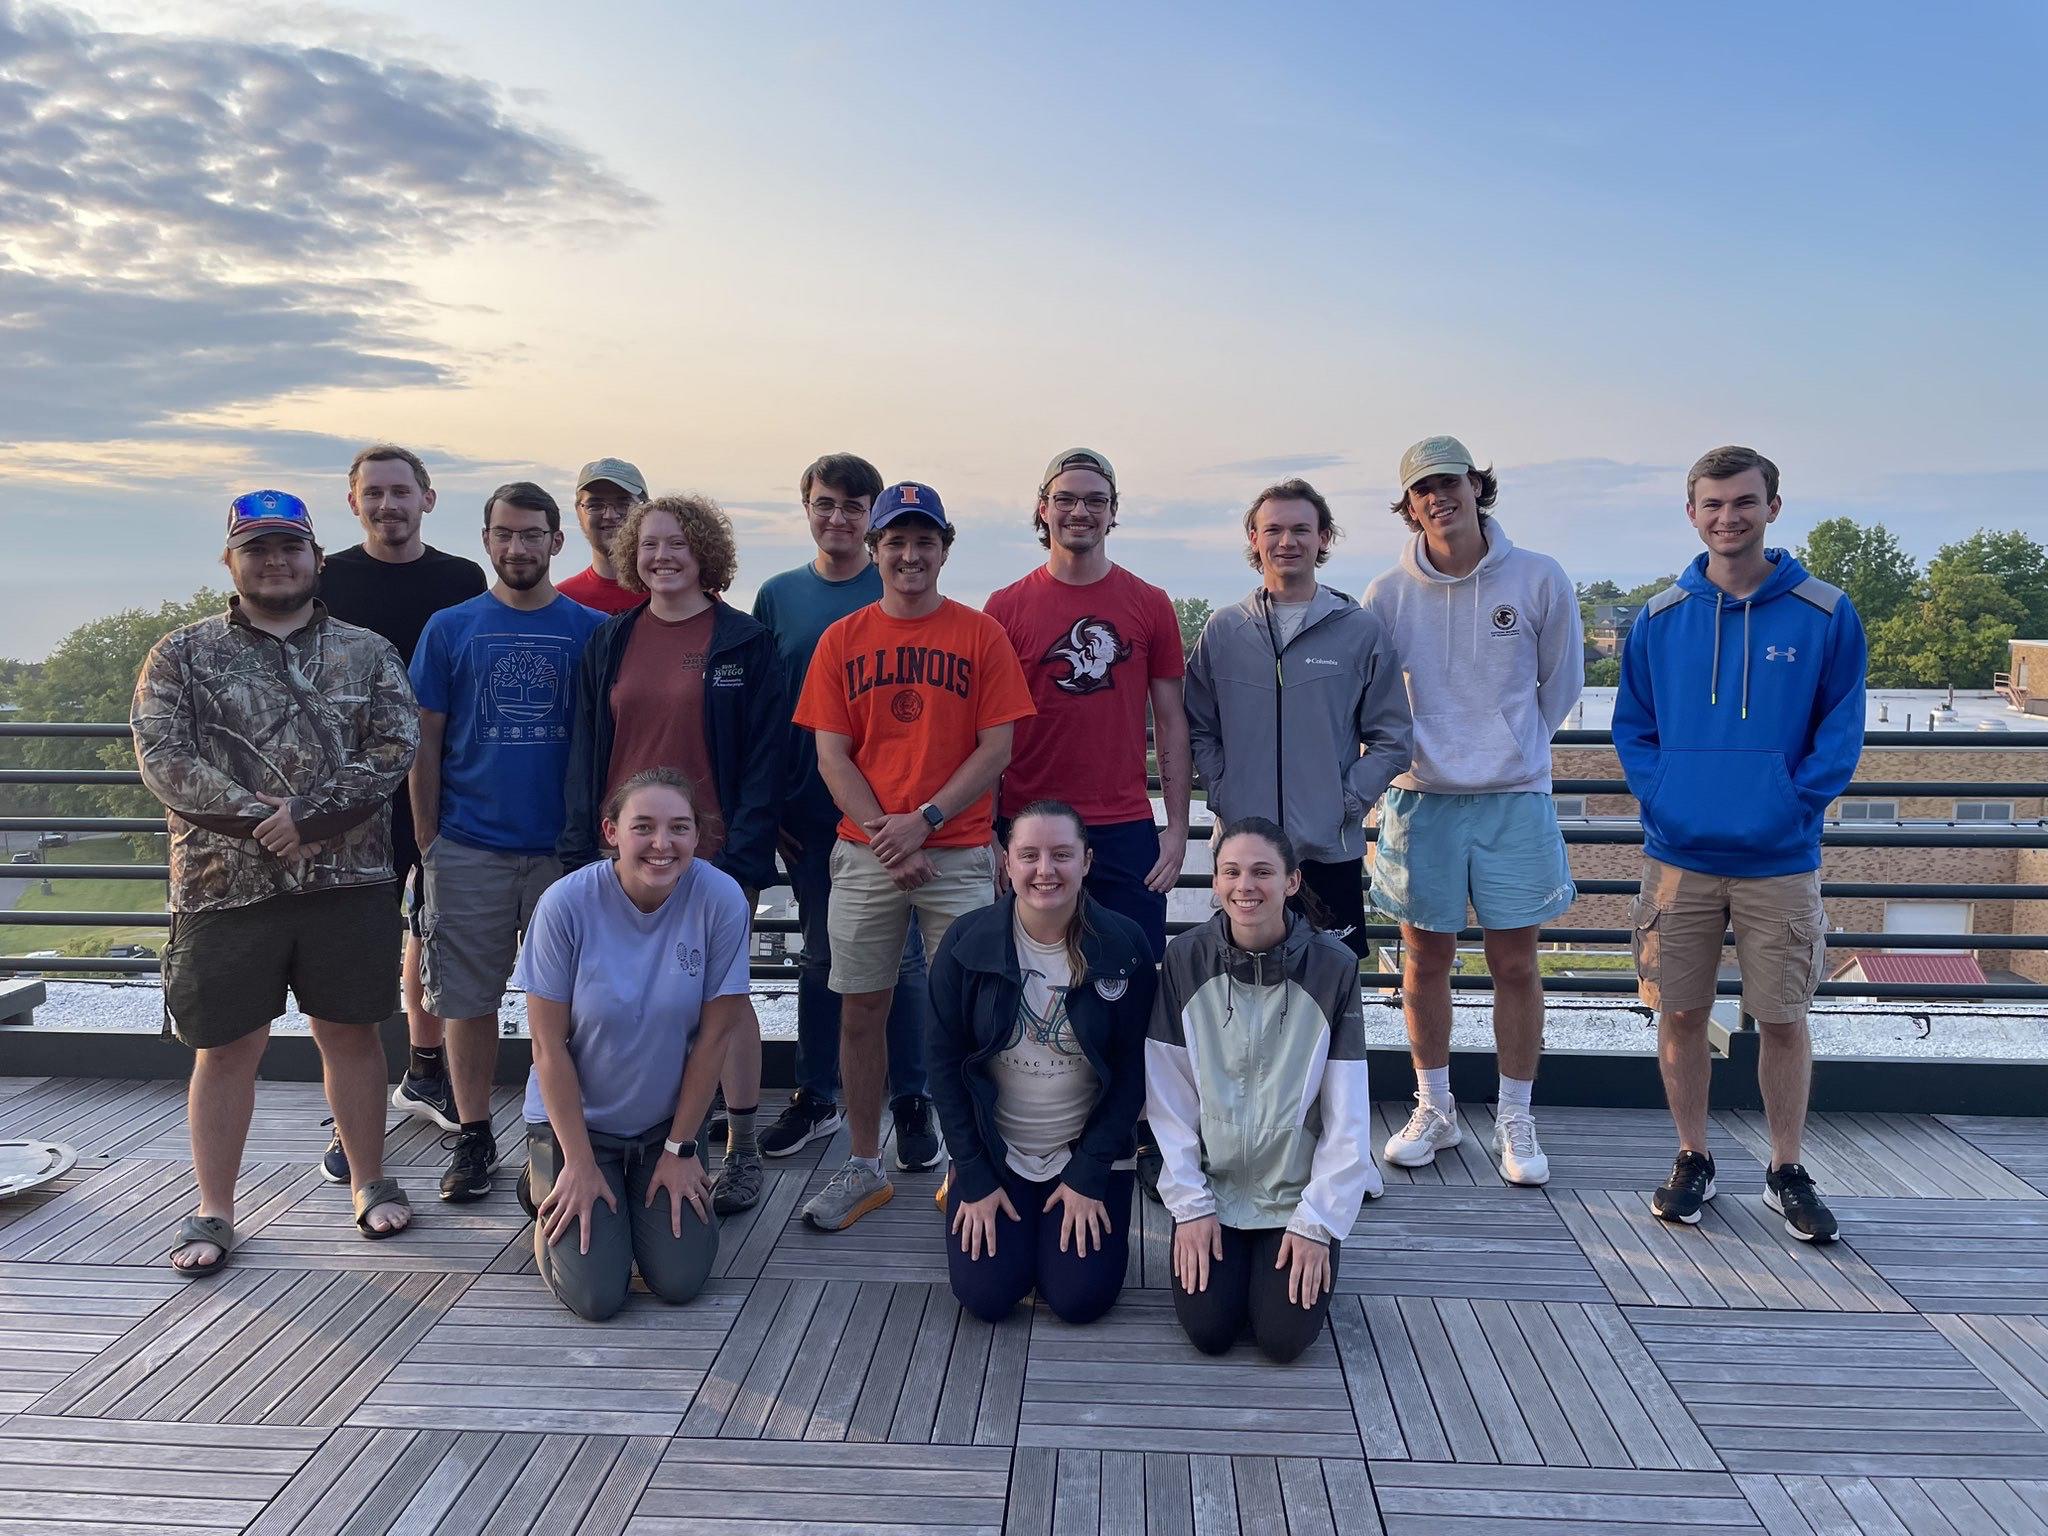 The chasers pose in front of a sunset for a picture after returning to Oswego.